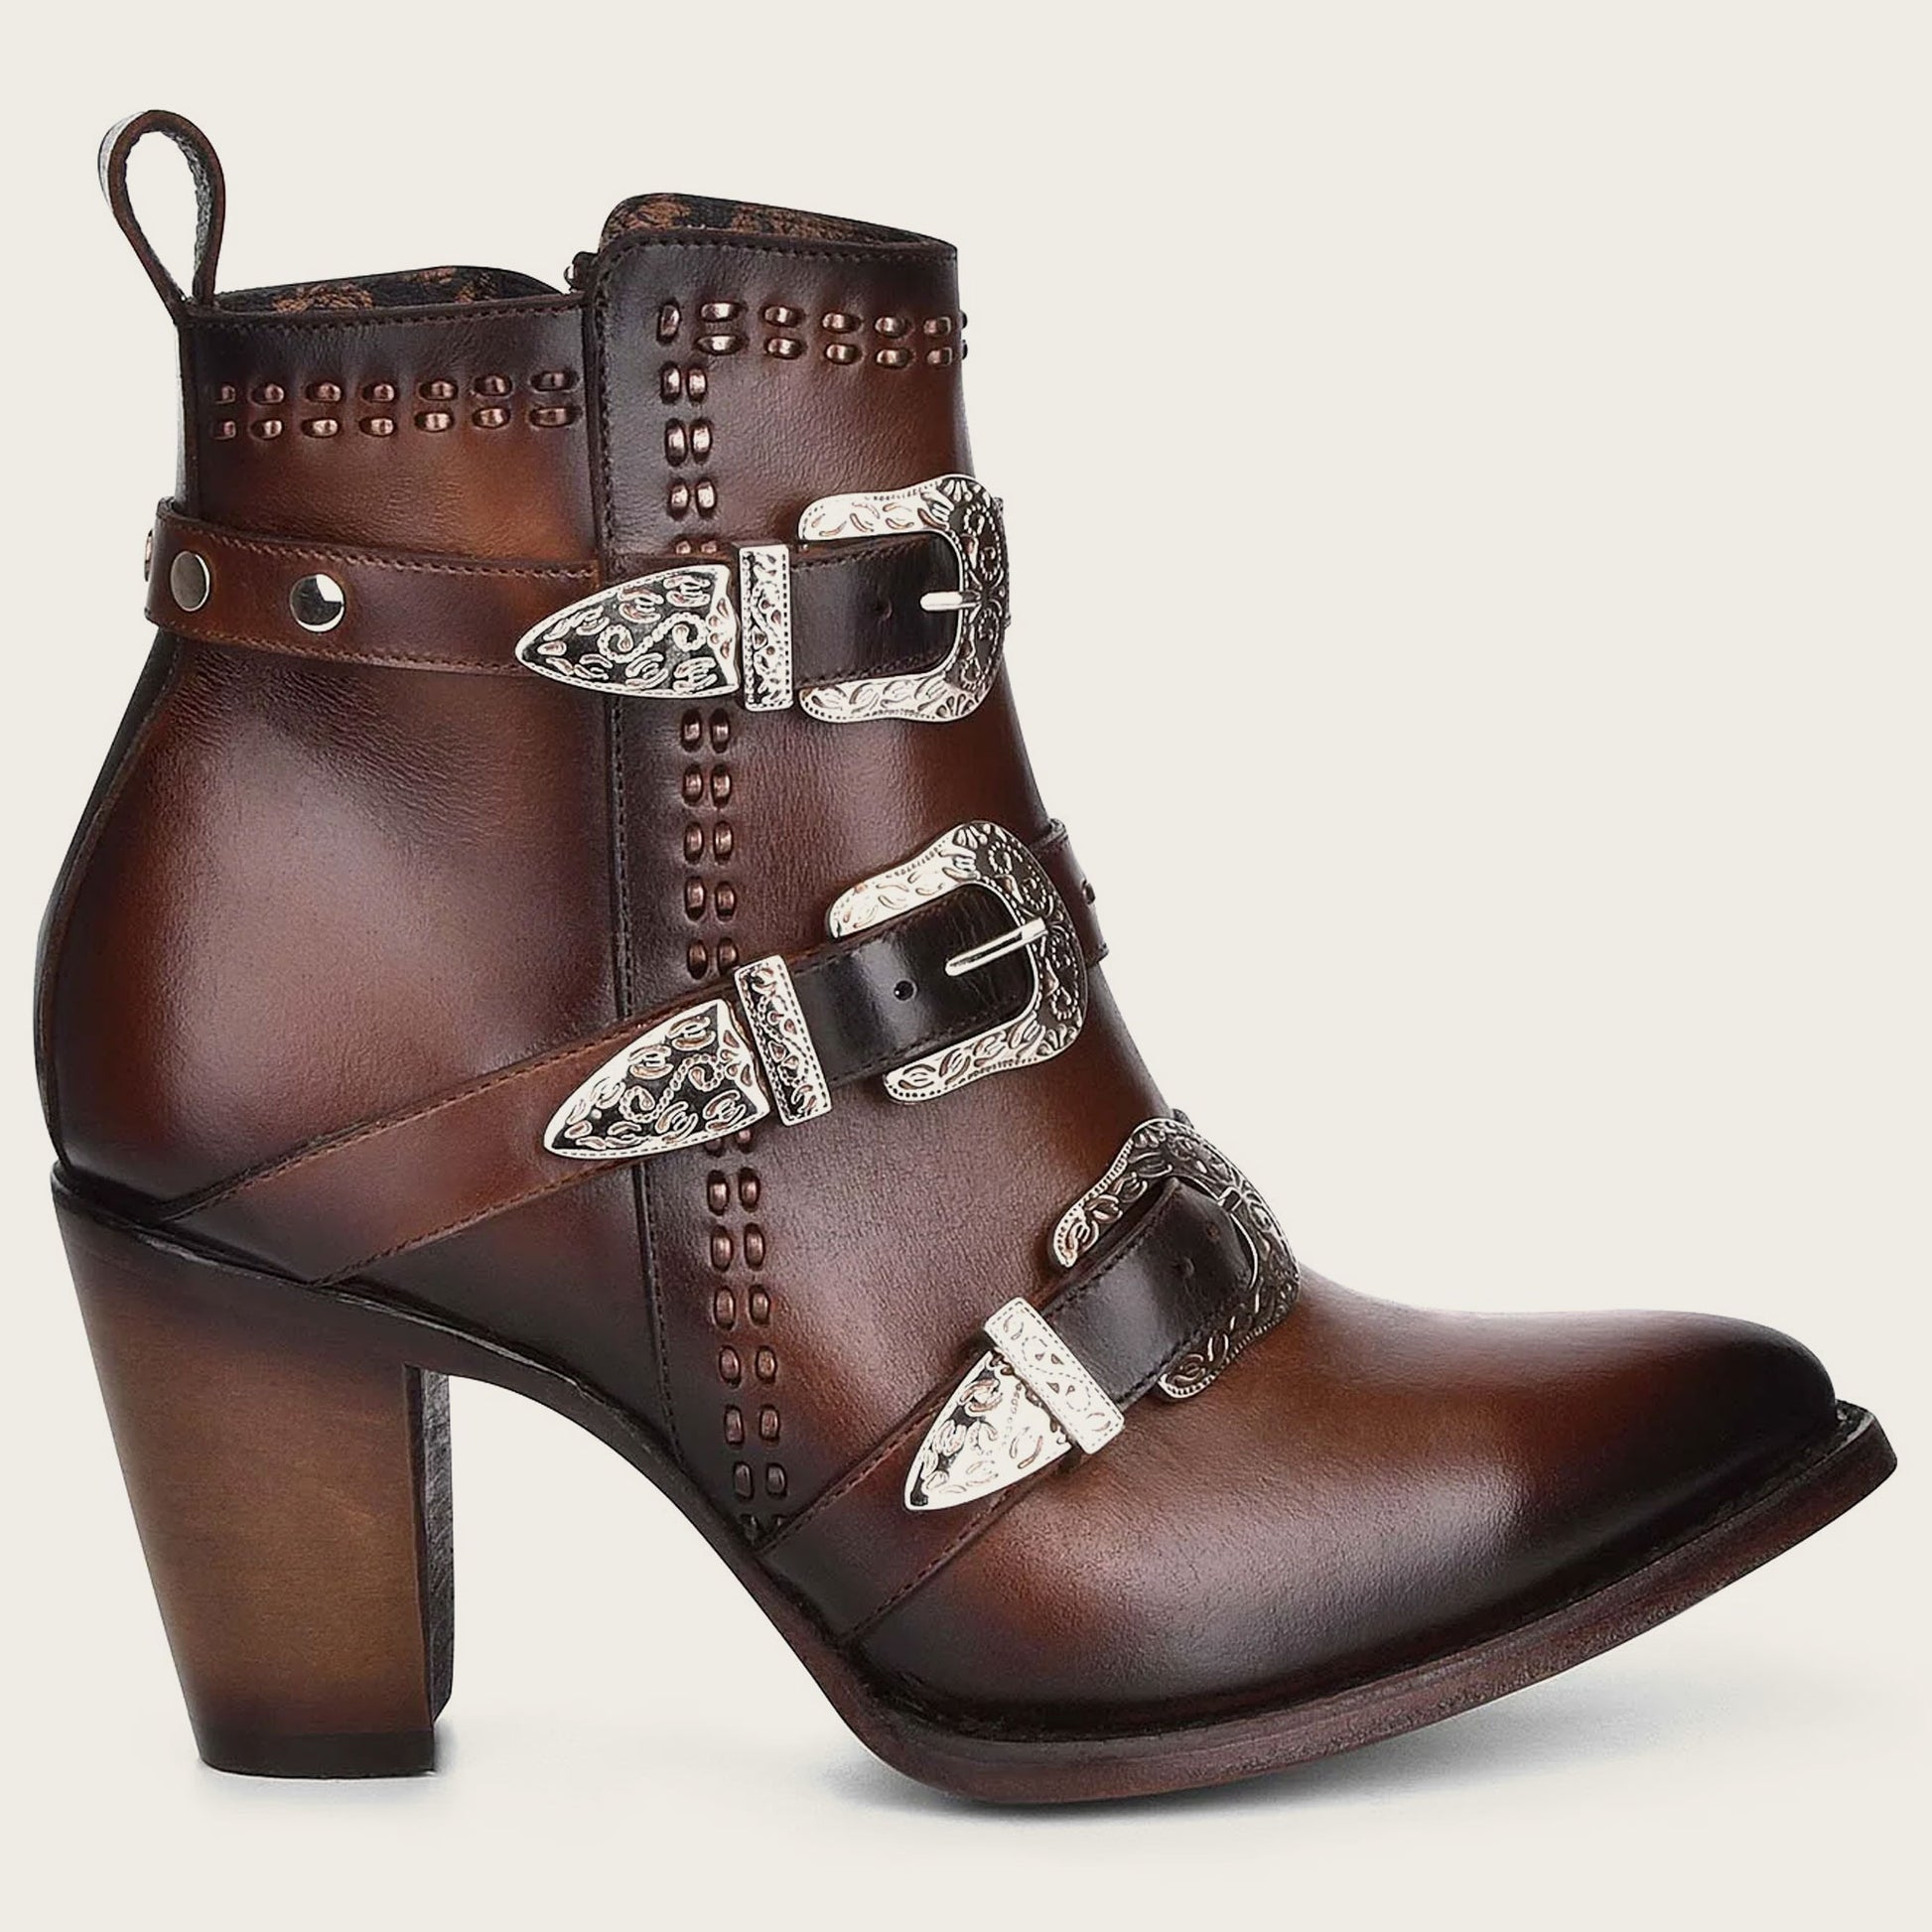 Featuring three adjustable leather straps with metallic buckles, this shoe adds sophistication to your look.